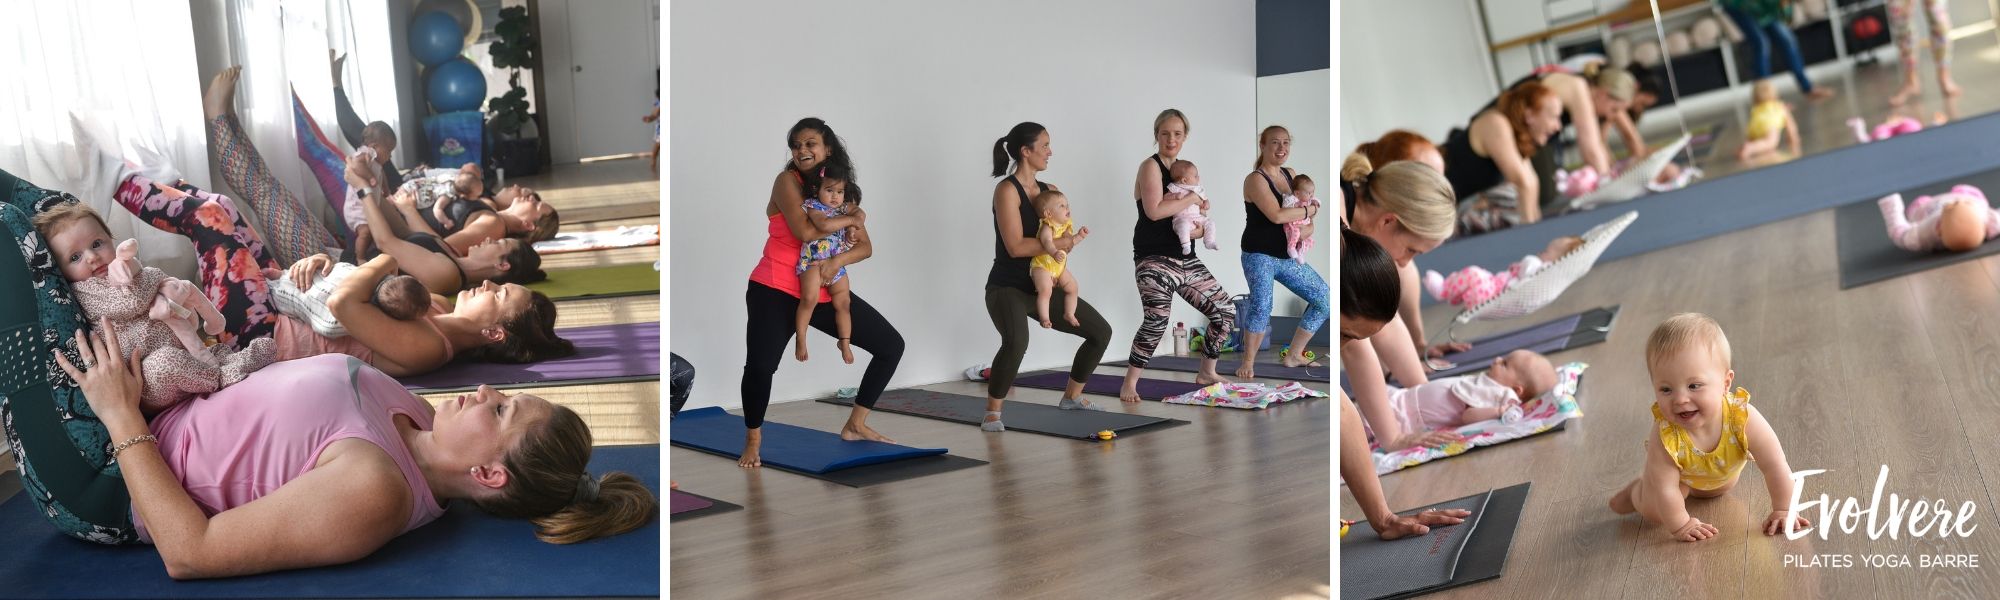 Mums and Bubs classes for postnatal recovery at Evolvere in Lane Cove Sydney